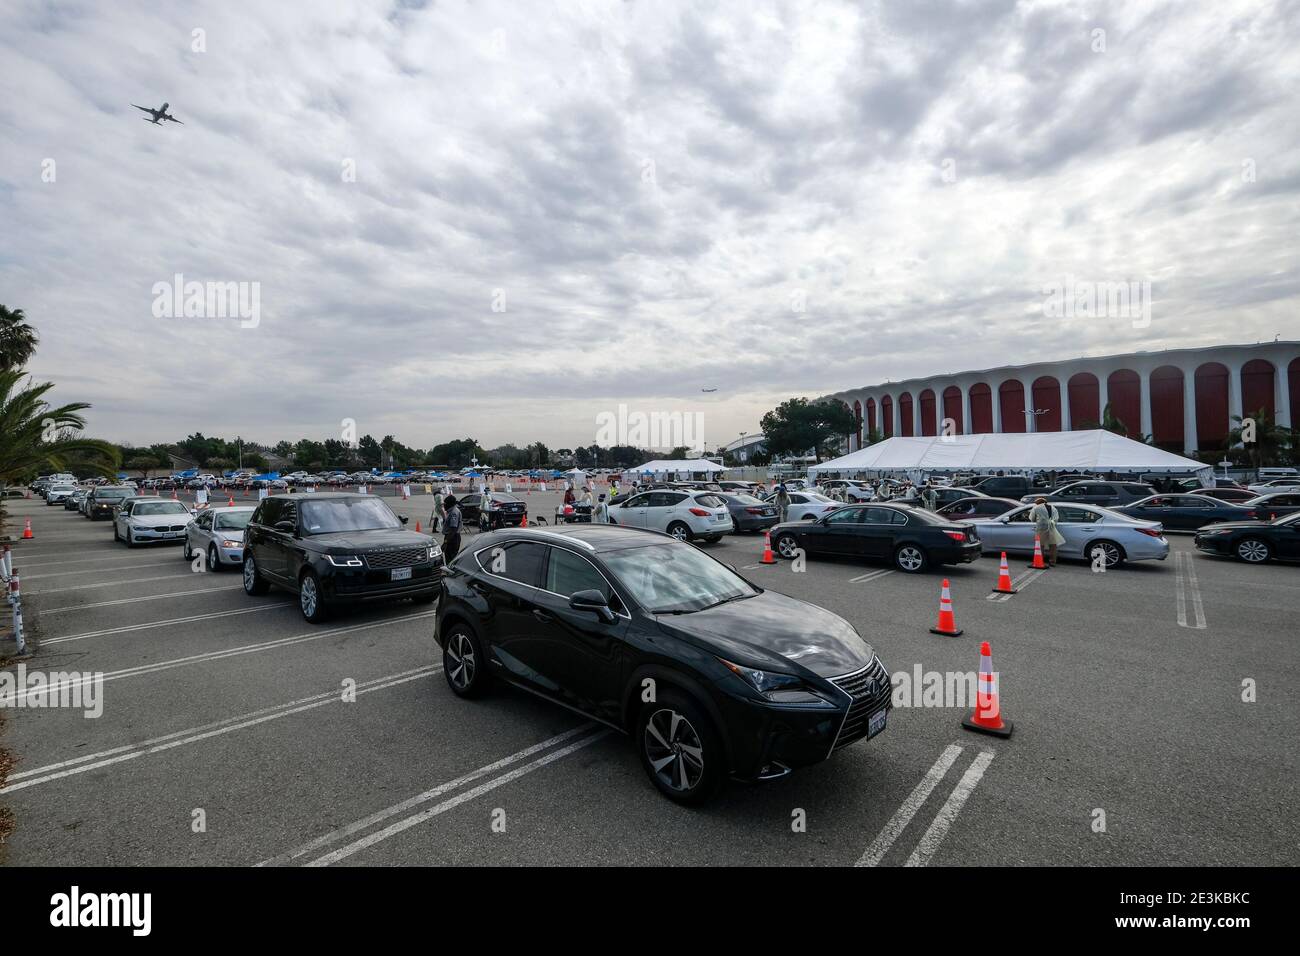 Los Angeles, California, USA. 19th Jan, 2021. Motorists wait in lines to get the coronavirus (COVID-19) vaccine in a parking lot at the Forum, Tuesday, Jan. 19, 2021, in Inglewood, Calif. Los Angeles County is ramping up vaccination efforts in its battle against the coronavirus, opening 5 large-scale vaccine sites to complement 75 smaller locations and the city-operated center at Dodger Stadium. The new county centers are located at Six Flags Magic Mountain, Cal State Northridge, the Pomona Fairplex, the L-A County Office of Education in Downey and the Forum in Inglewood. L-A officials have Stock Photo